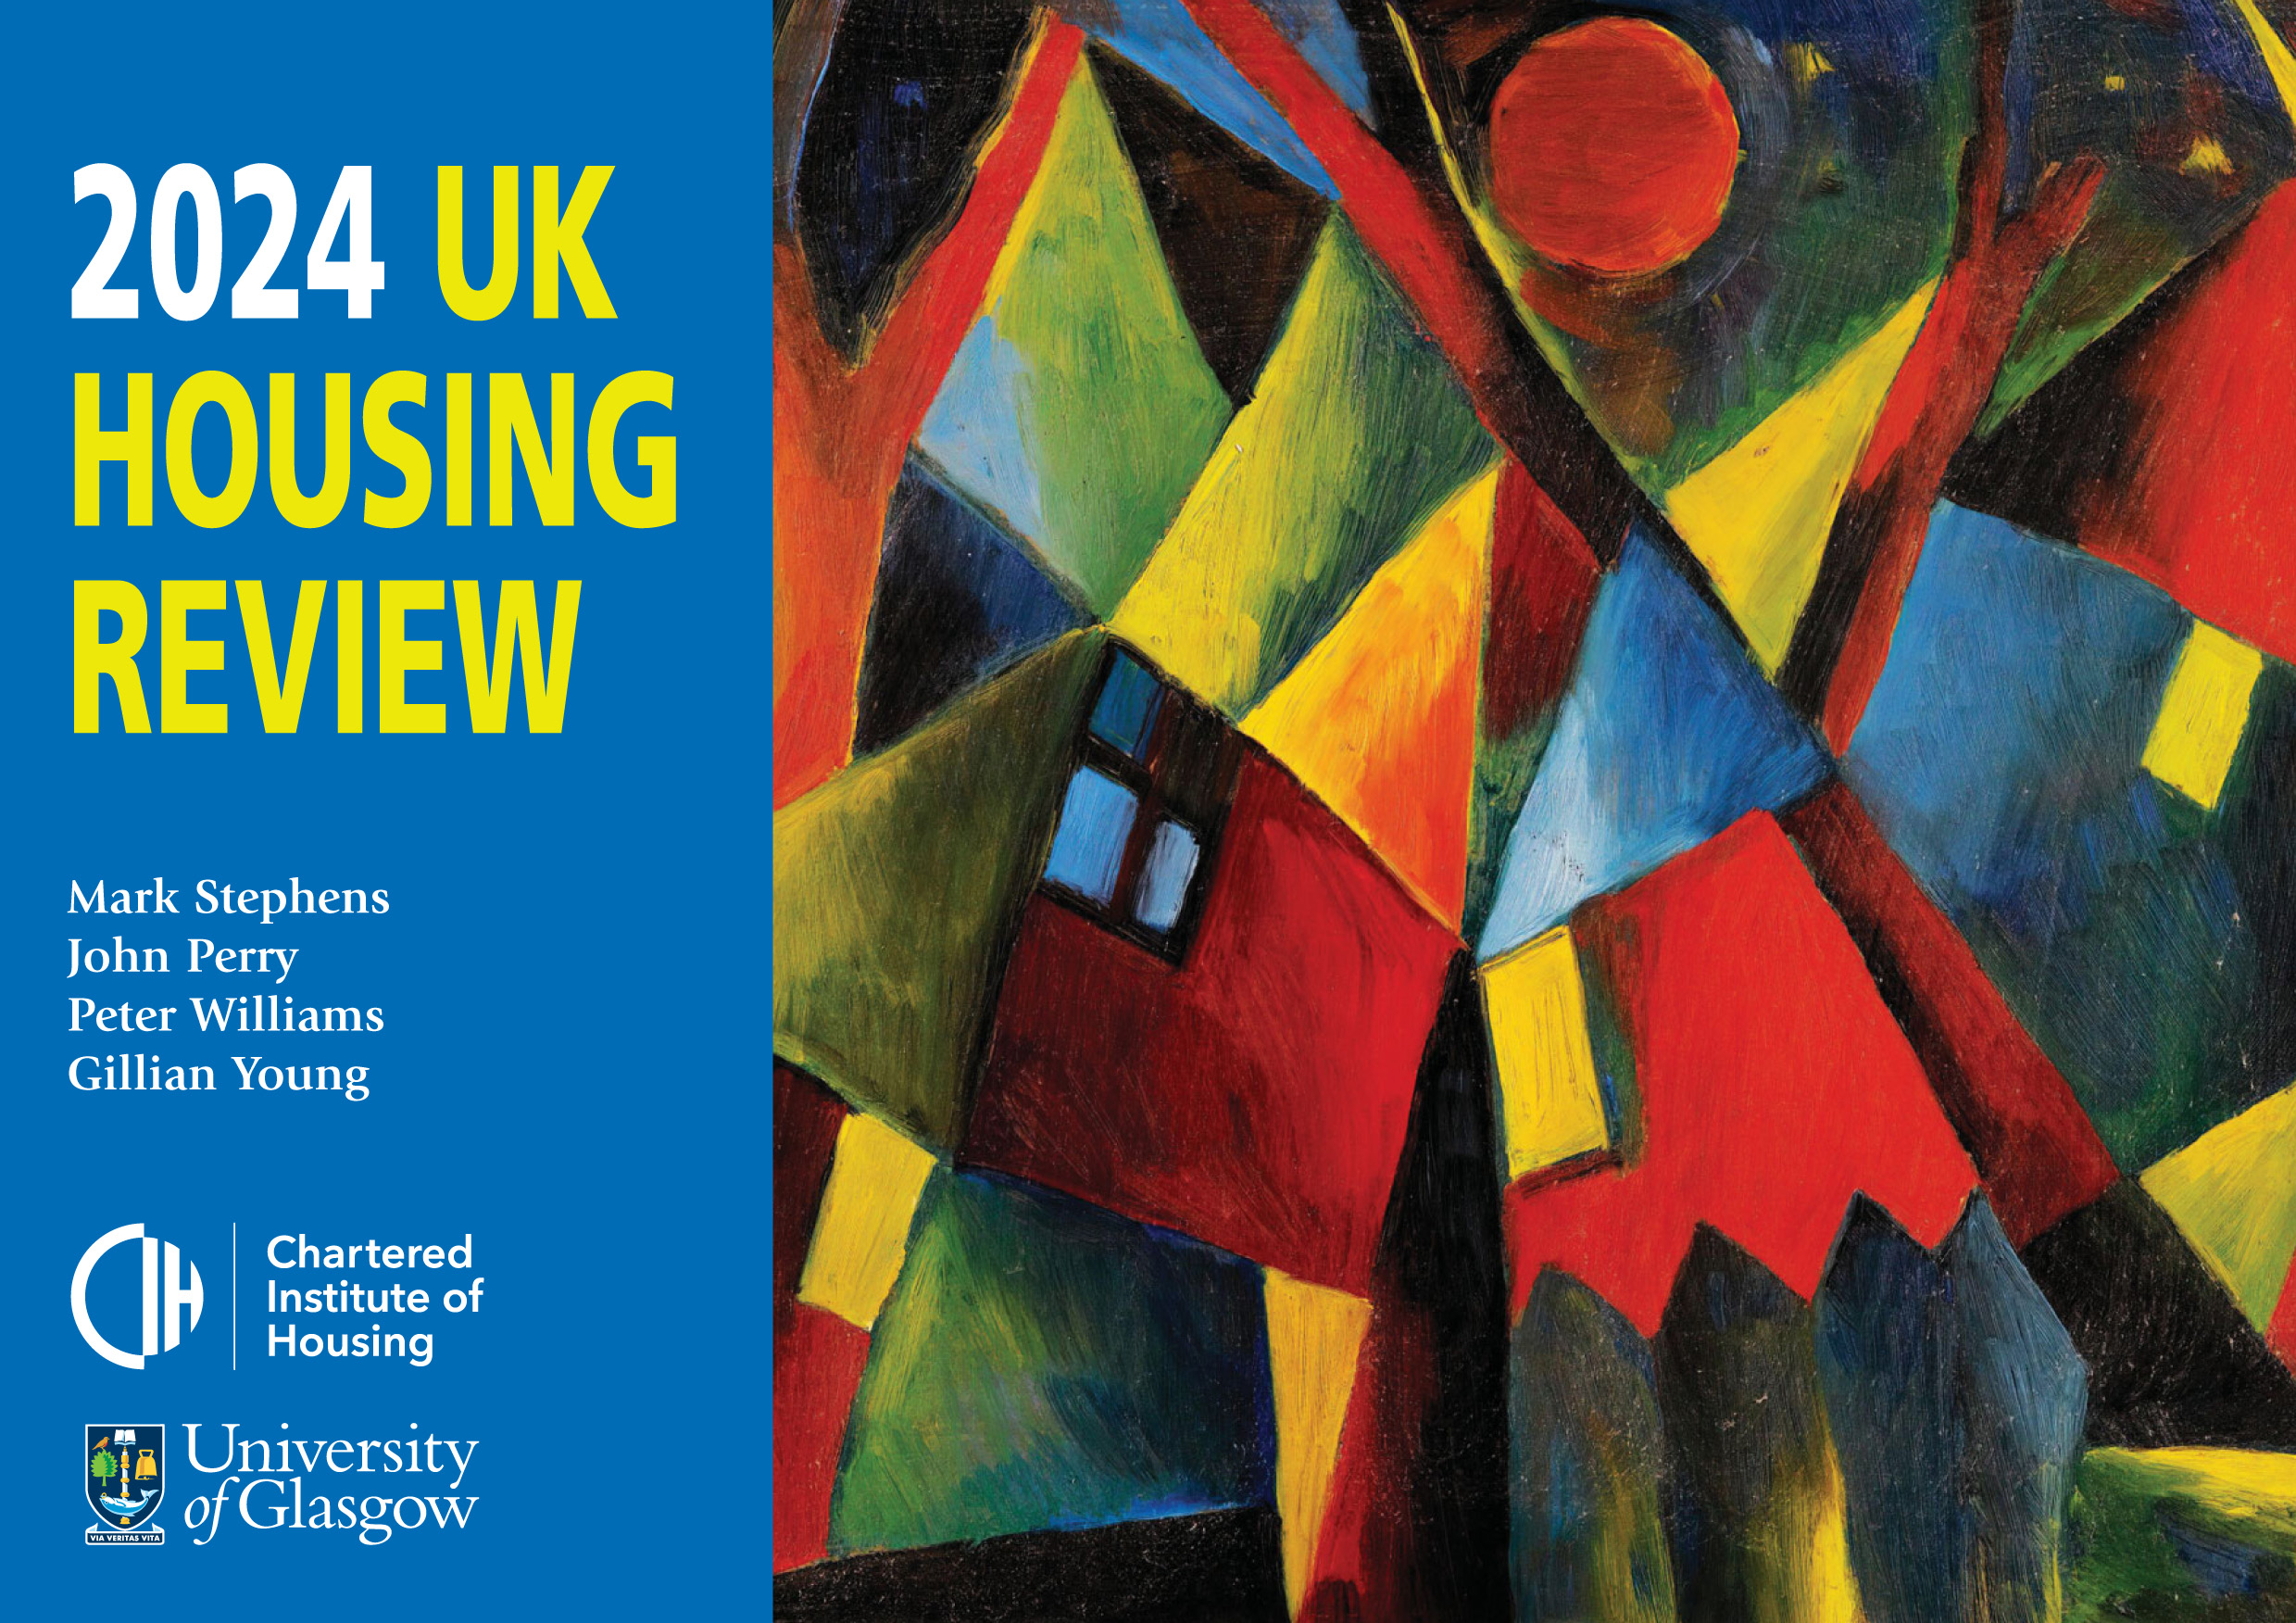 Lord Best calls for 2024 UK Housing Review to inform all housing policy decisions